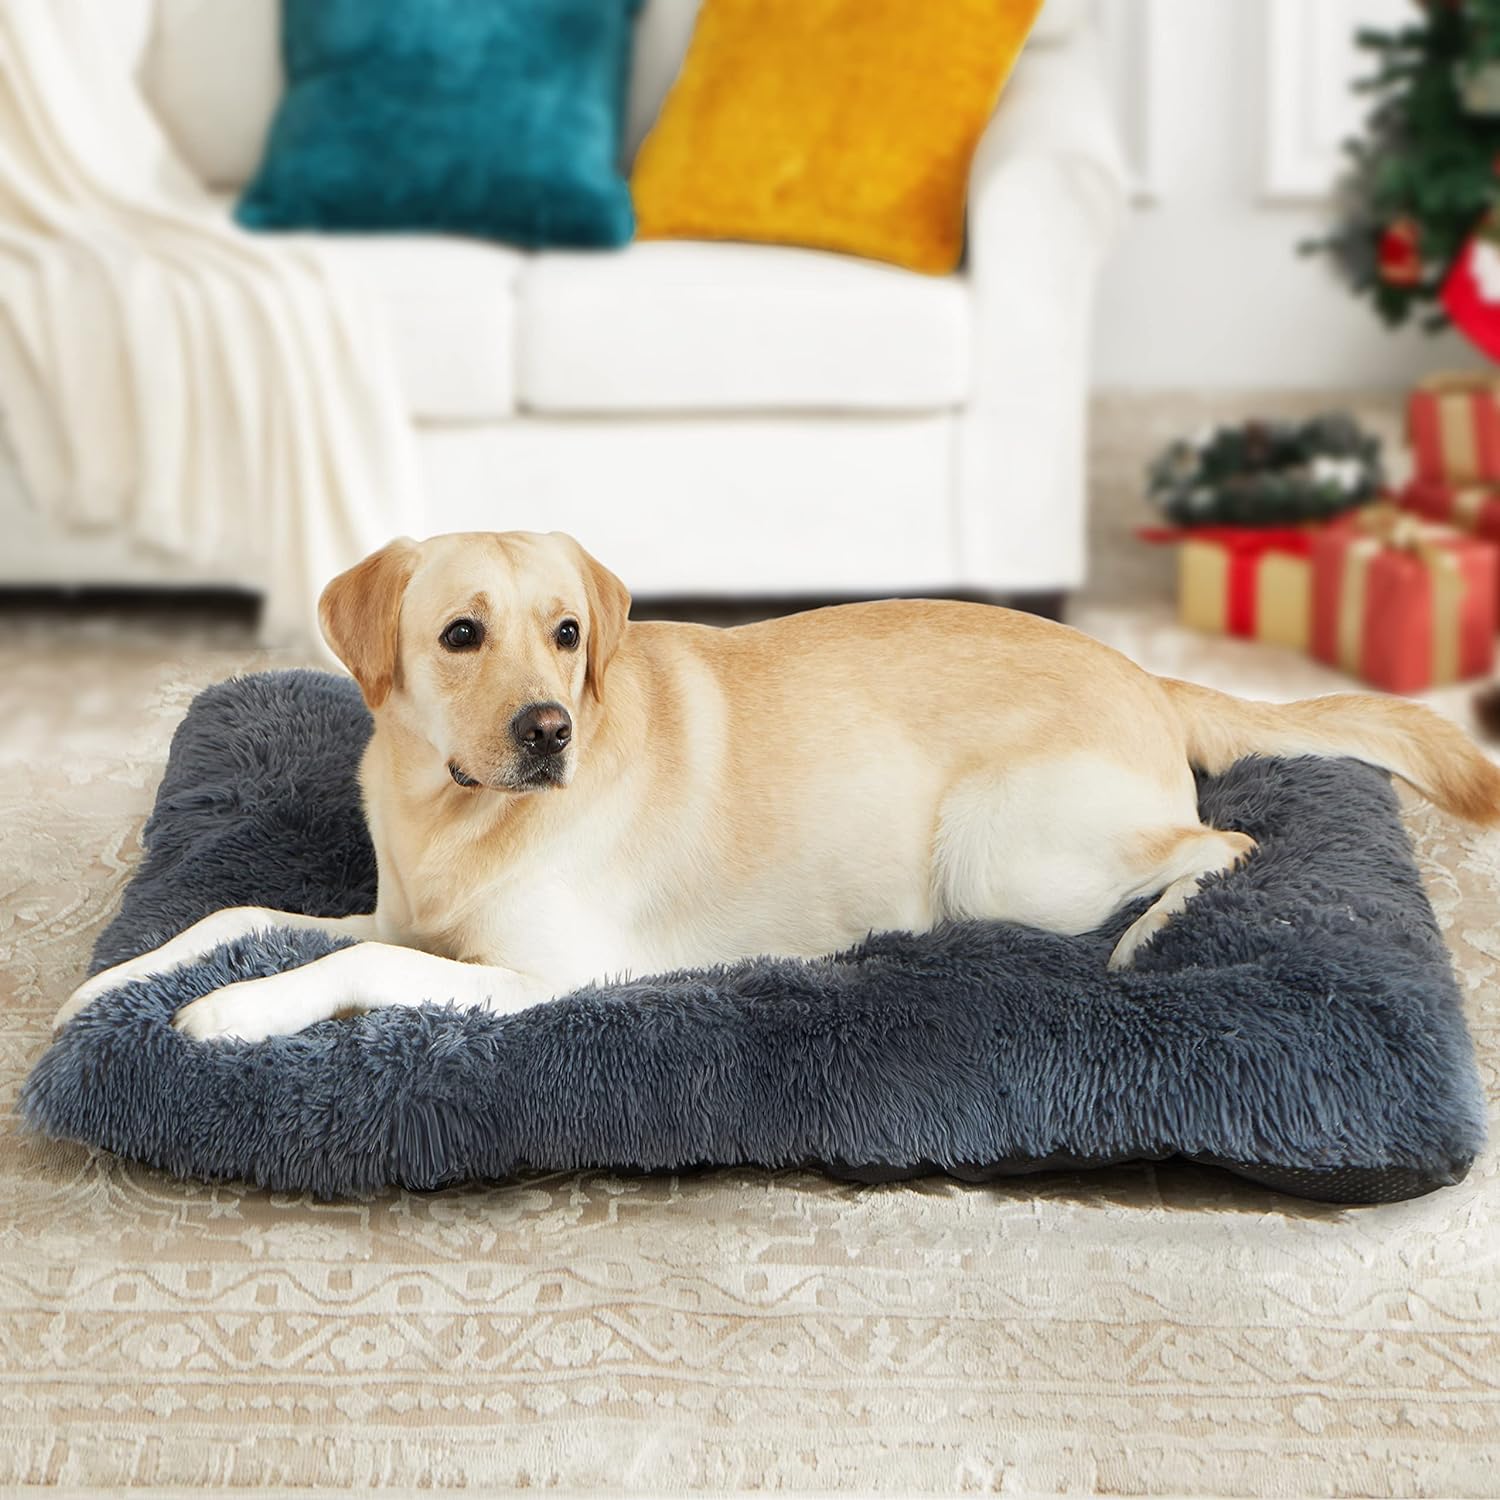 Save Big on Your Purchase - 53% Off Western Home Large Dog Bed - Limited Time Offer!